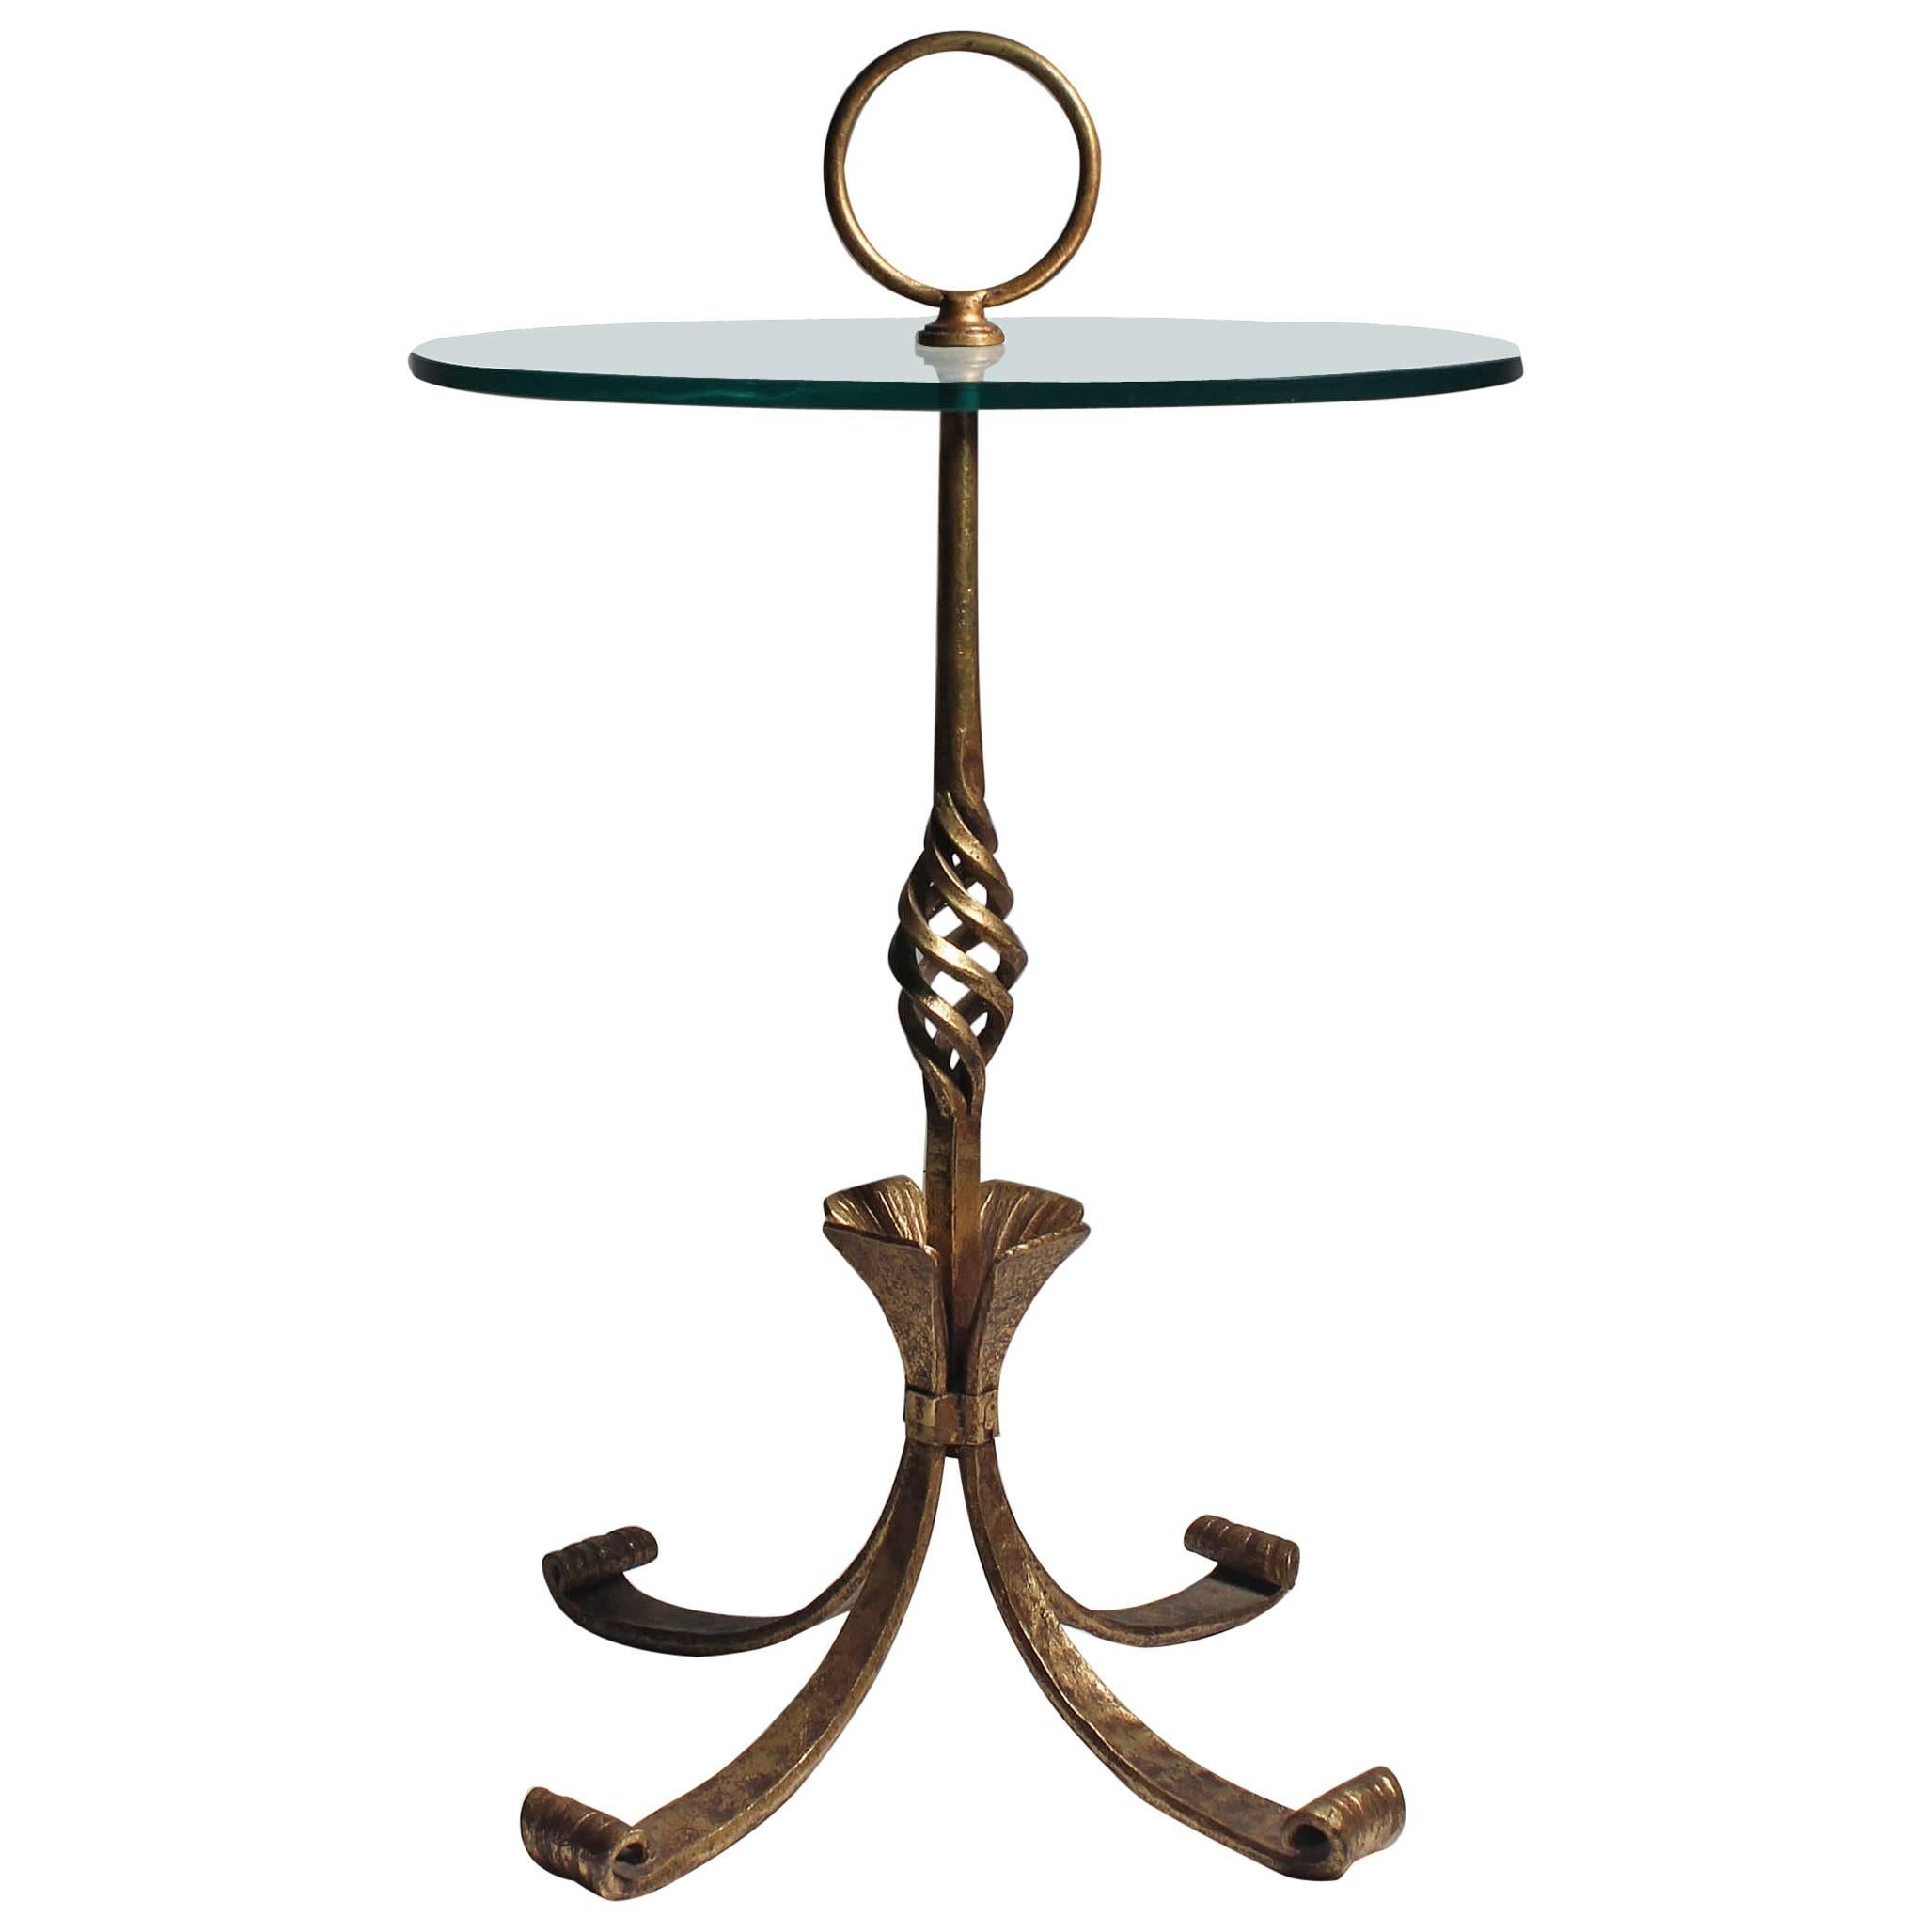 Erwin Gruen Hand-Forged Gilded Wrought Iron Ring Table